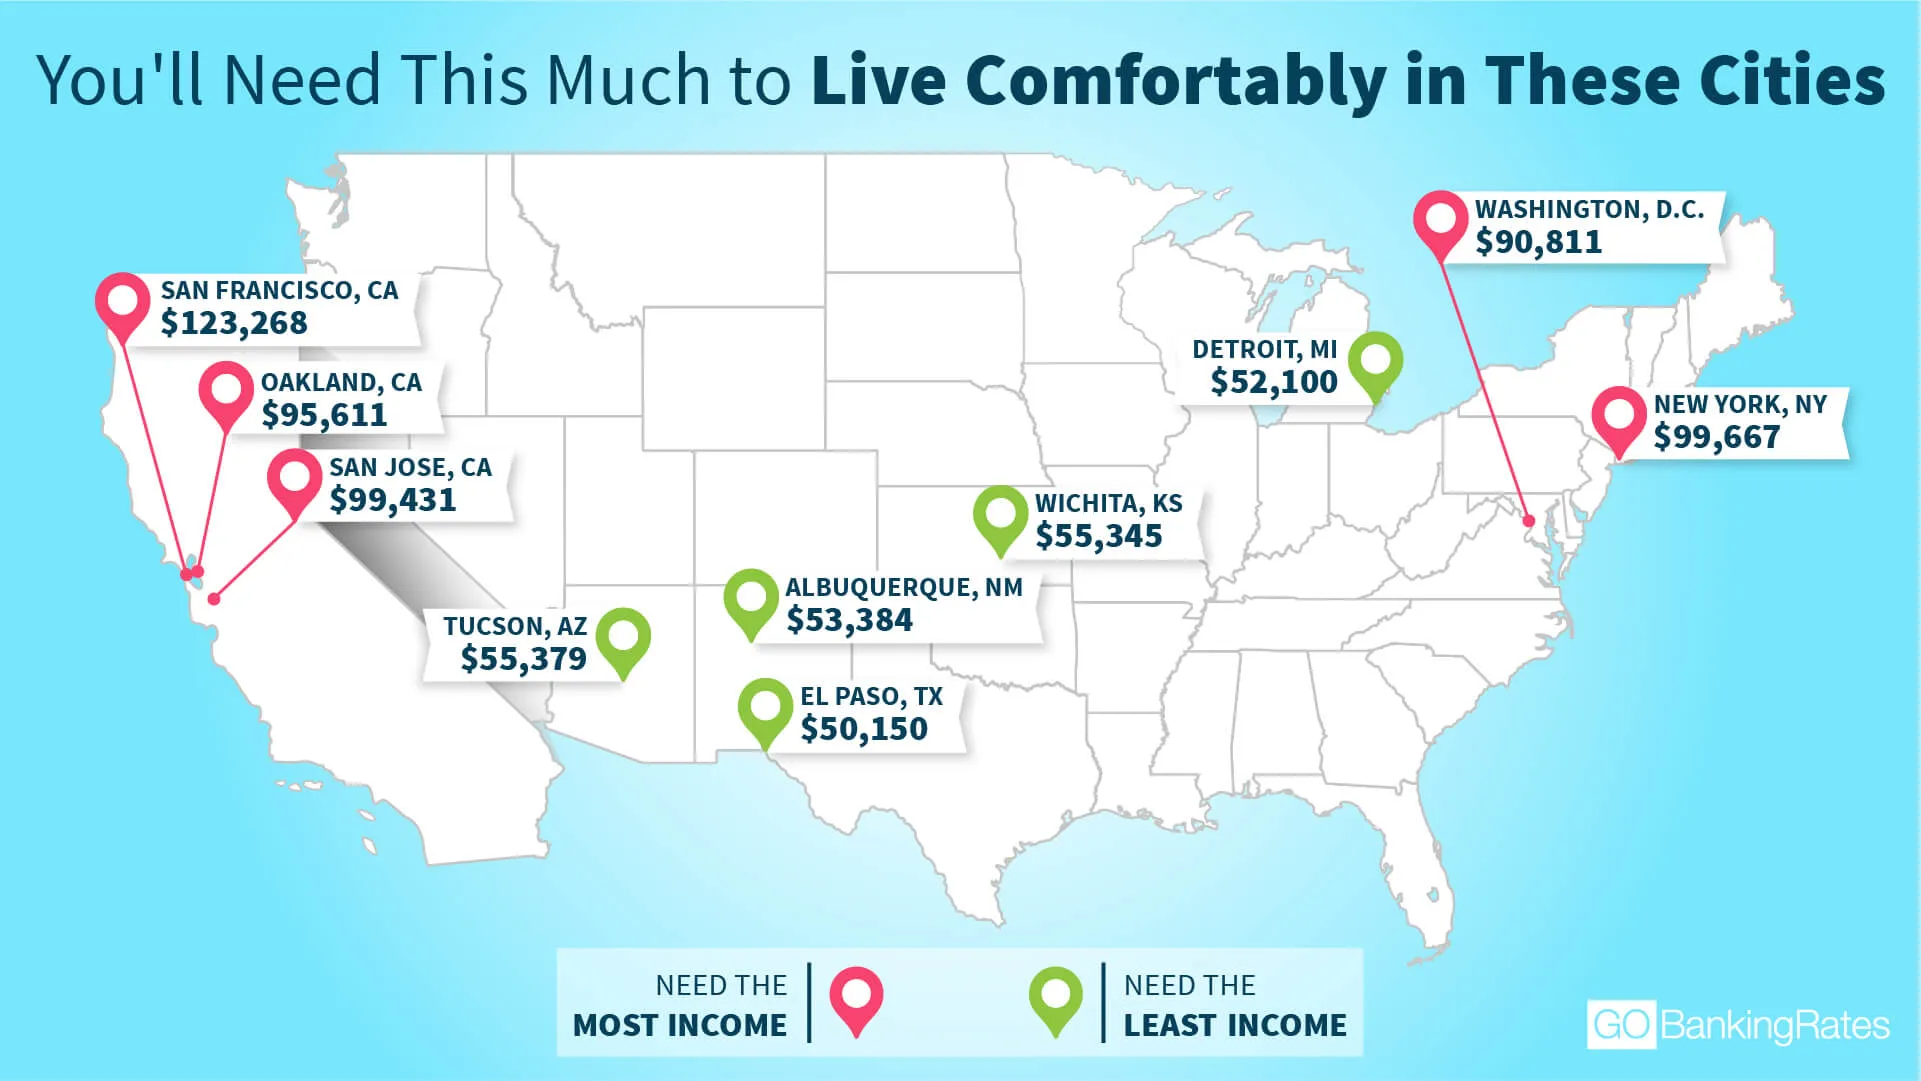 Live Comfortably in These Cities